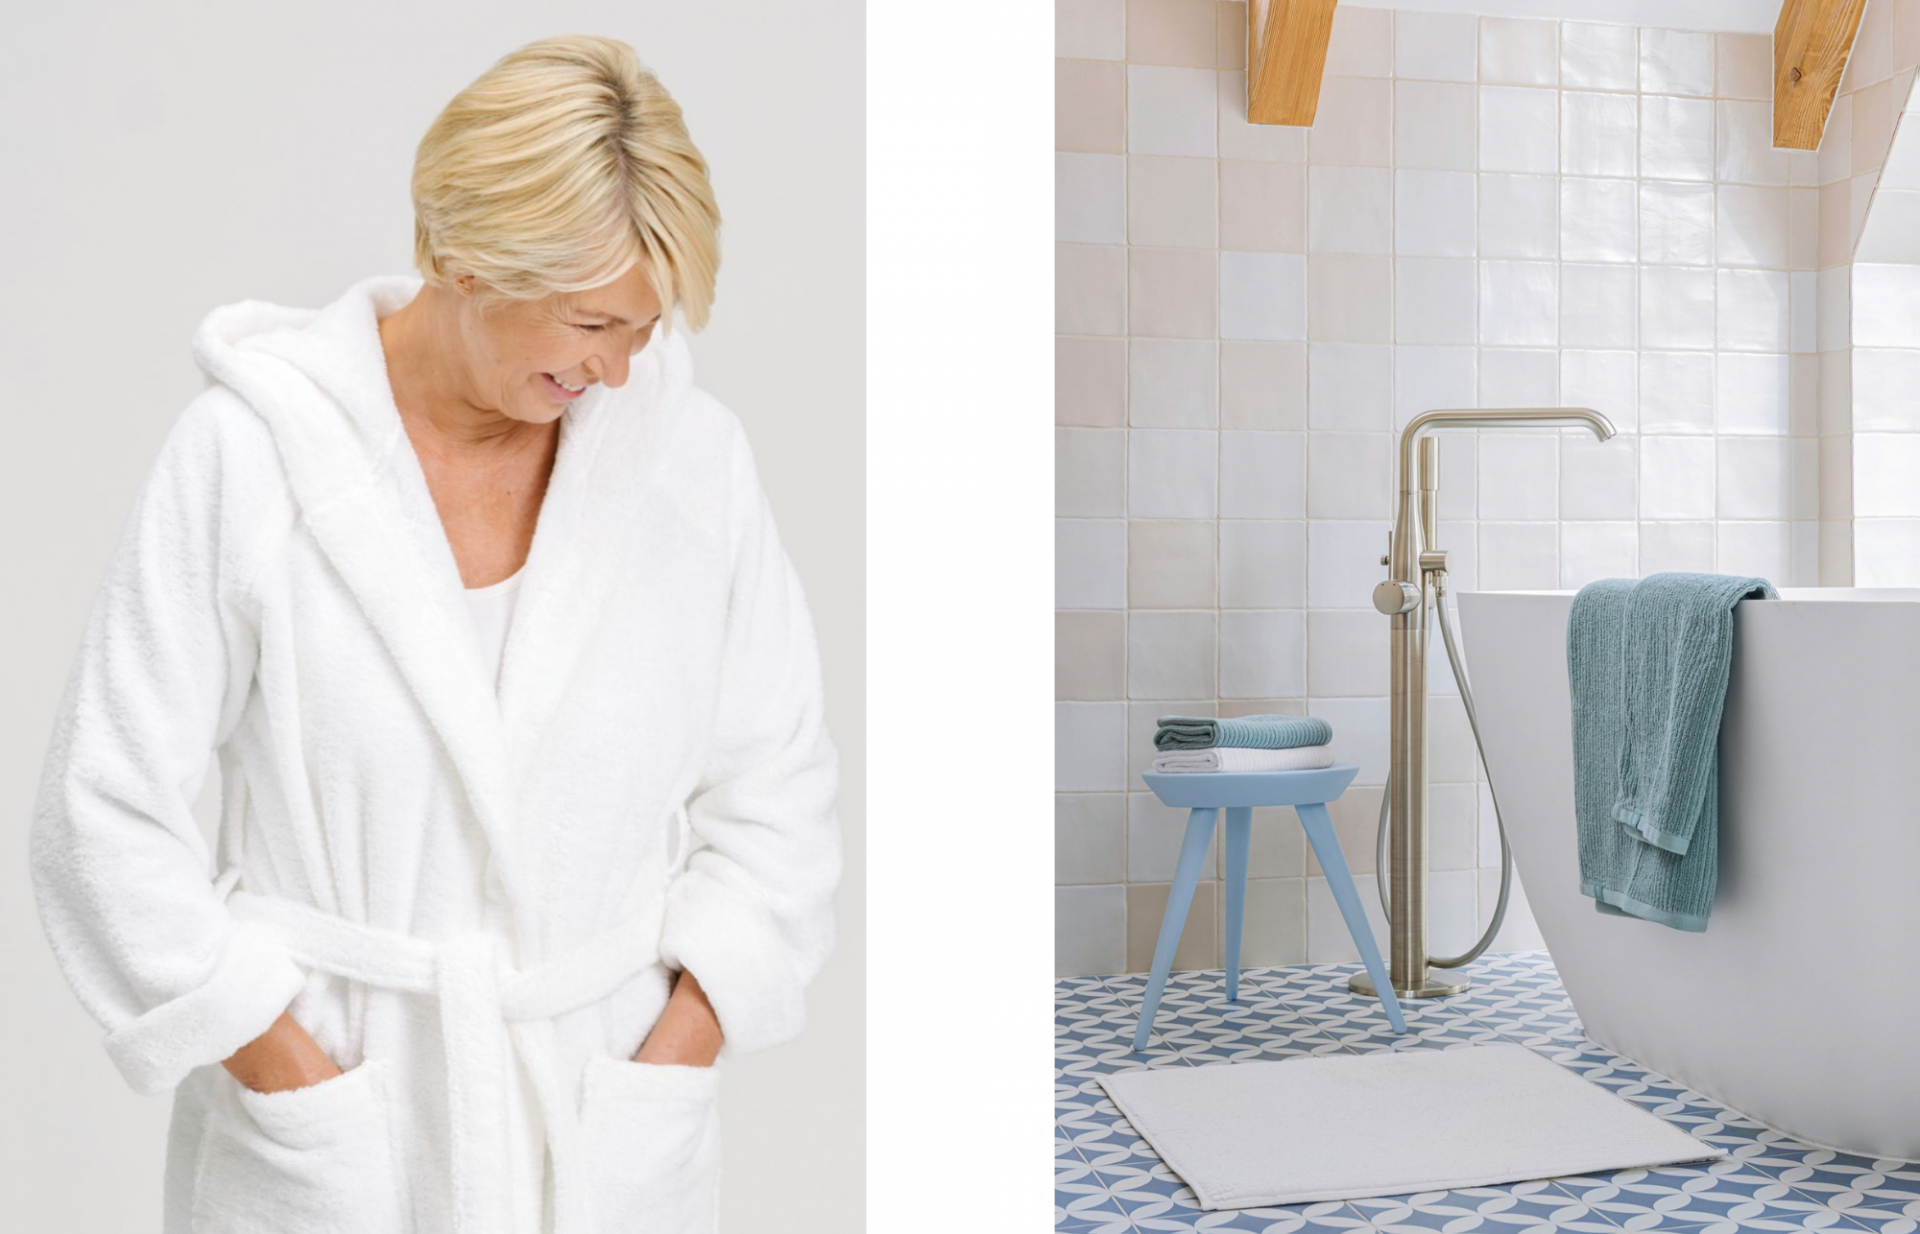 All our bath linen hues go together well as each collection is designed using the Pantone Colour Matching system.